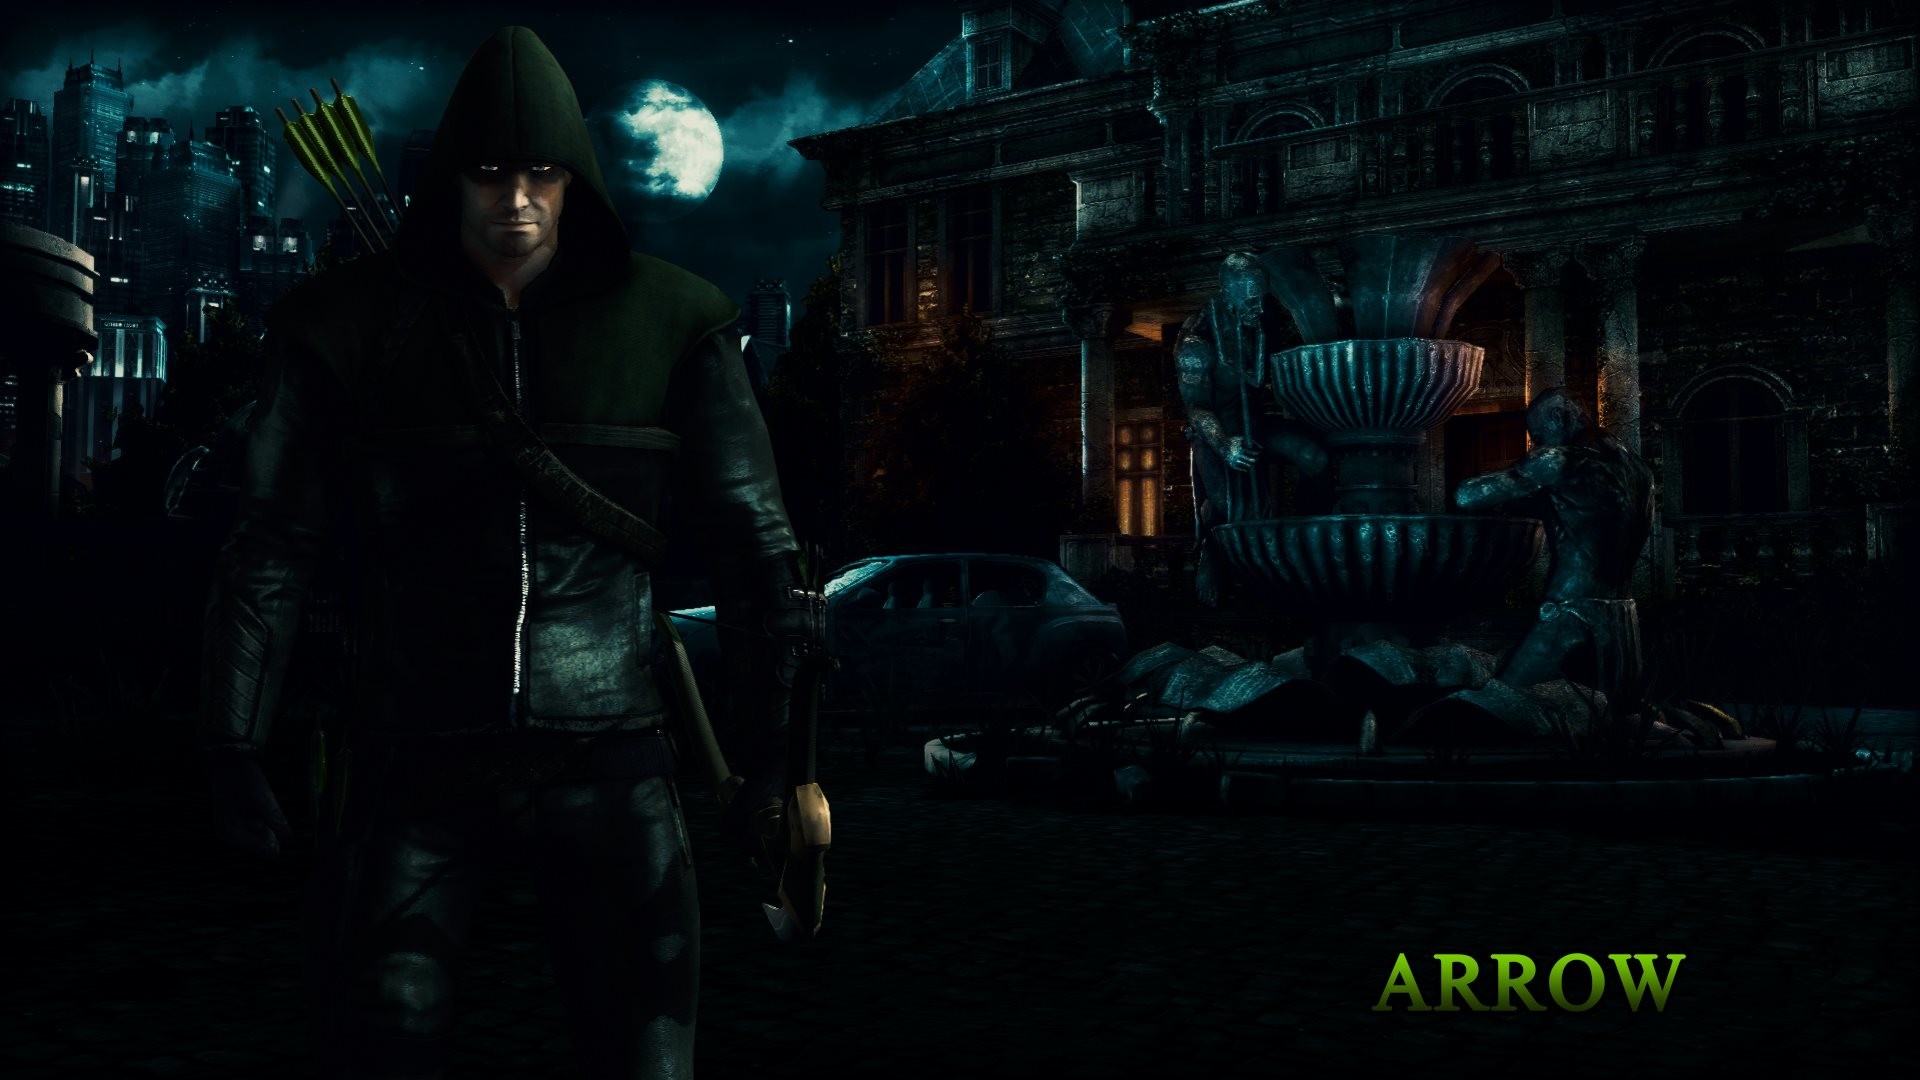 1920x1080 In the 5th wallpaper is Arrow from Injustice: Gods Among Us